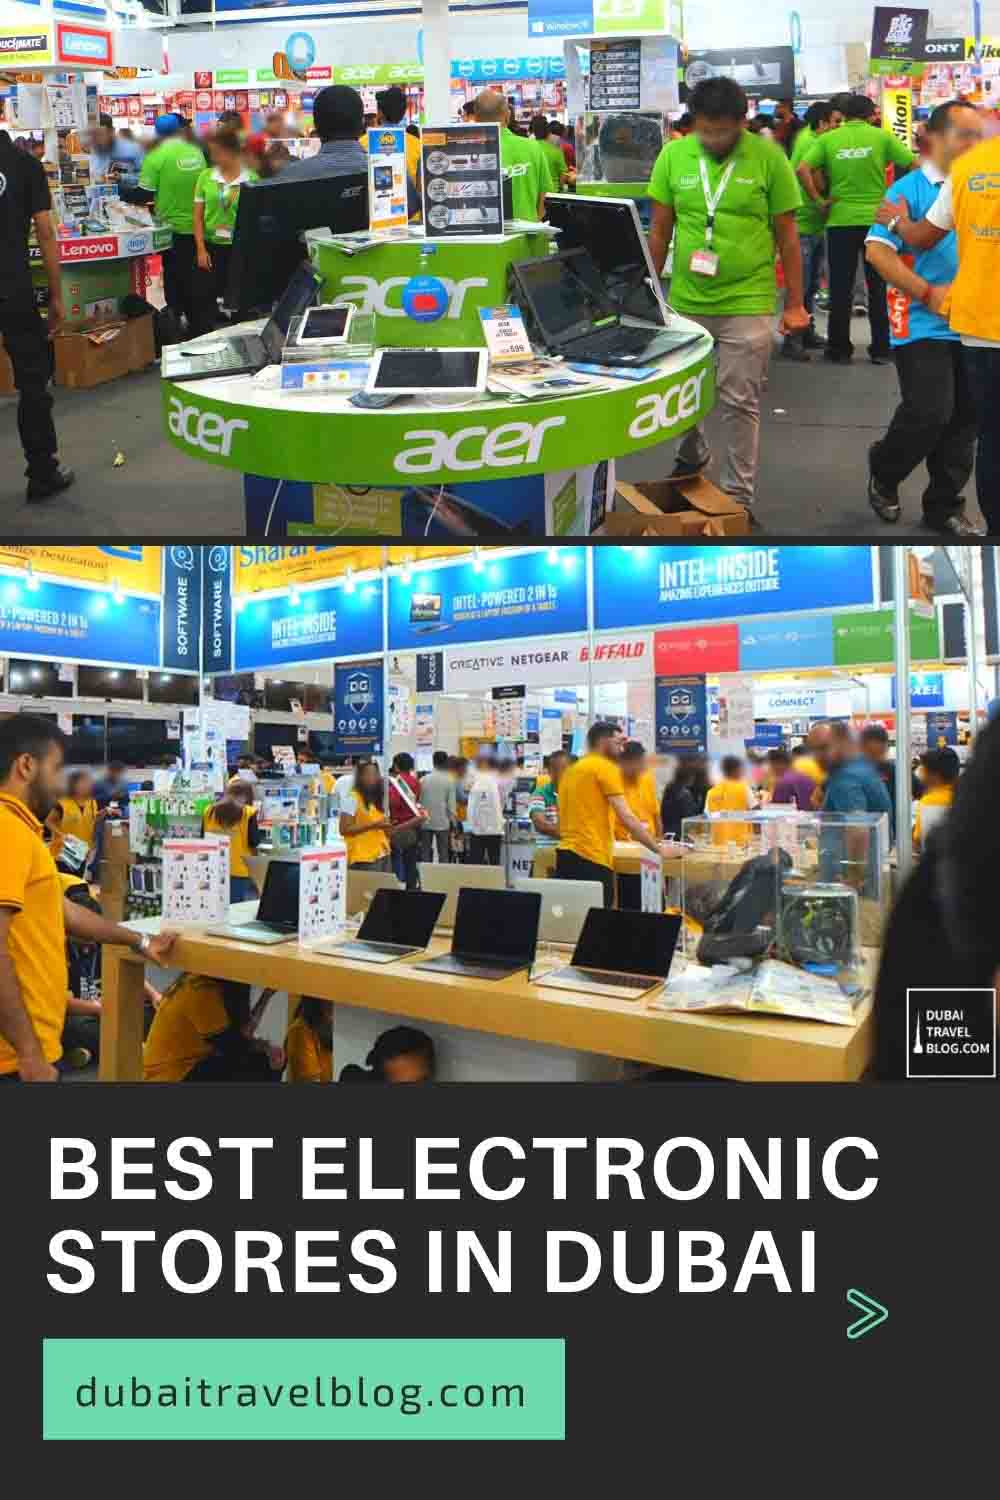 BEST ELECTRONIC STORES IN DUBAI